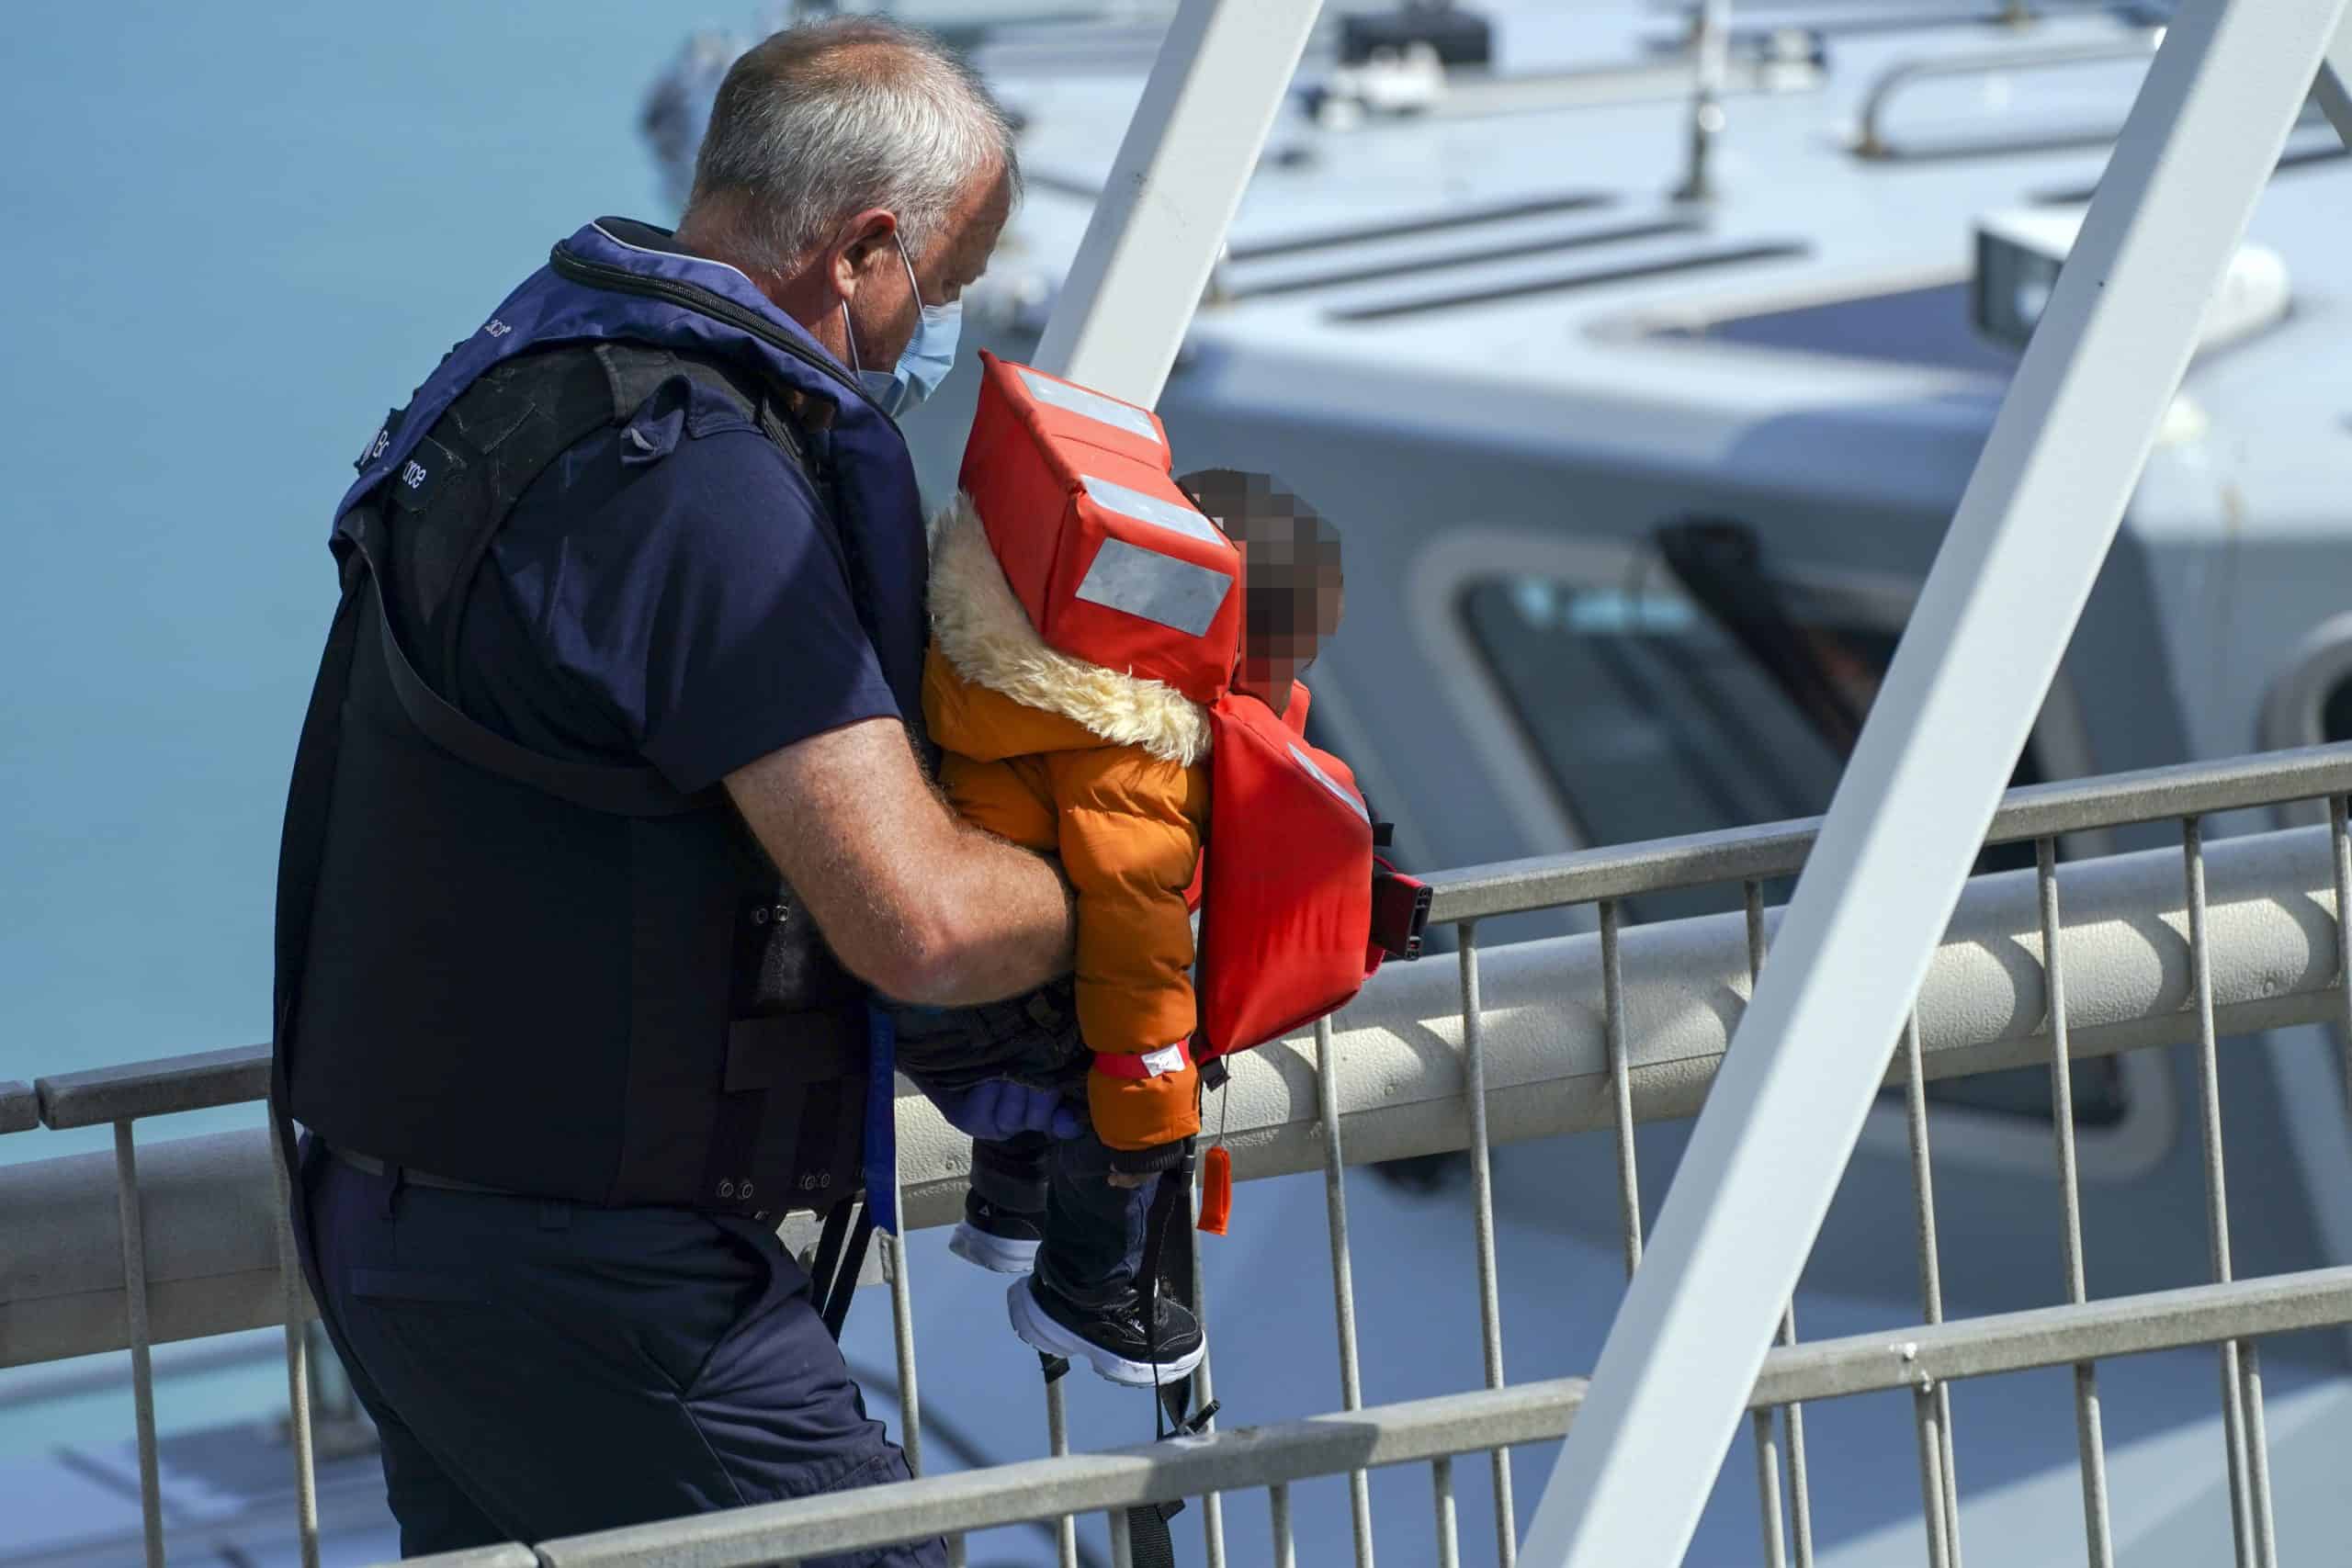 Toddlers among latest migrants crossing Channel days after tragedy